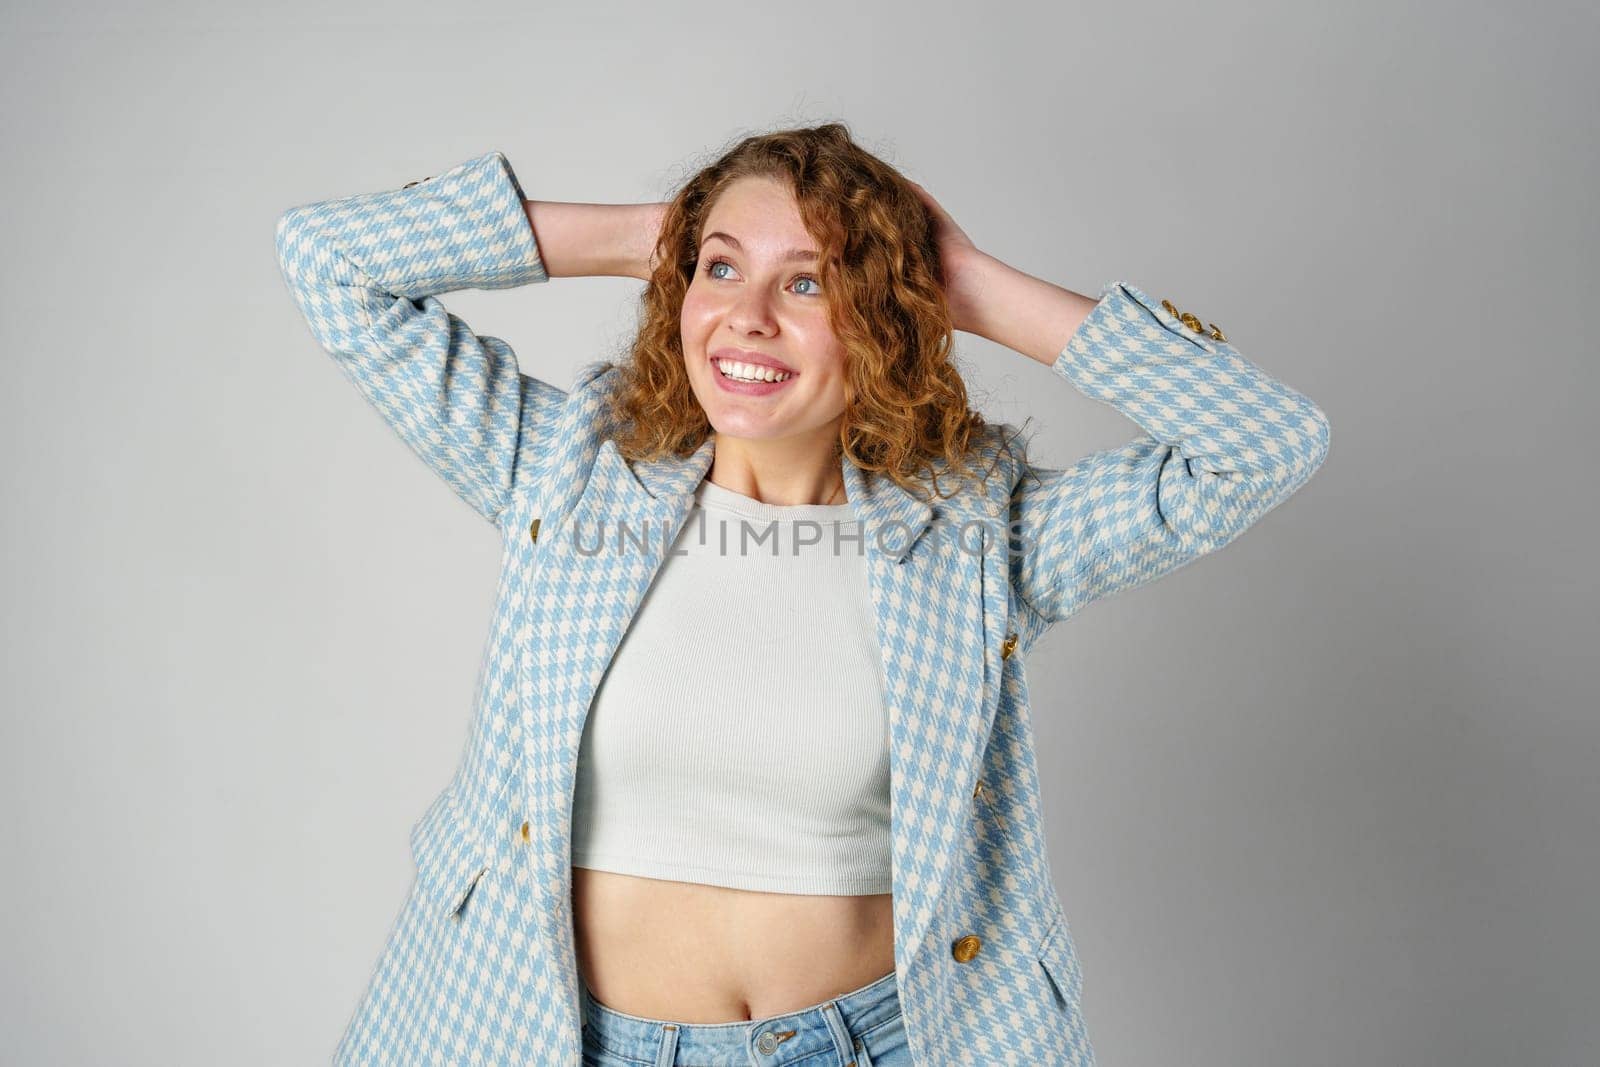 Young woman with curly hair in blue jacket posing on gray background close up